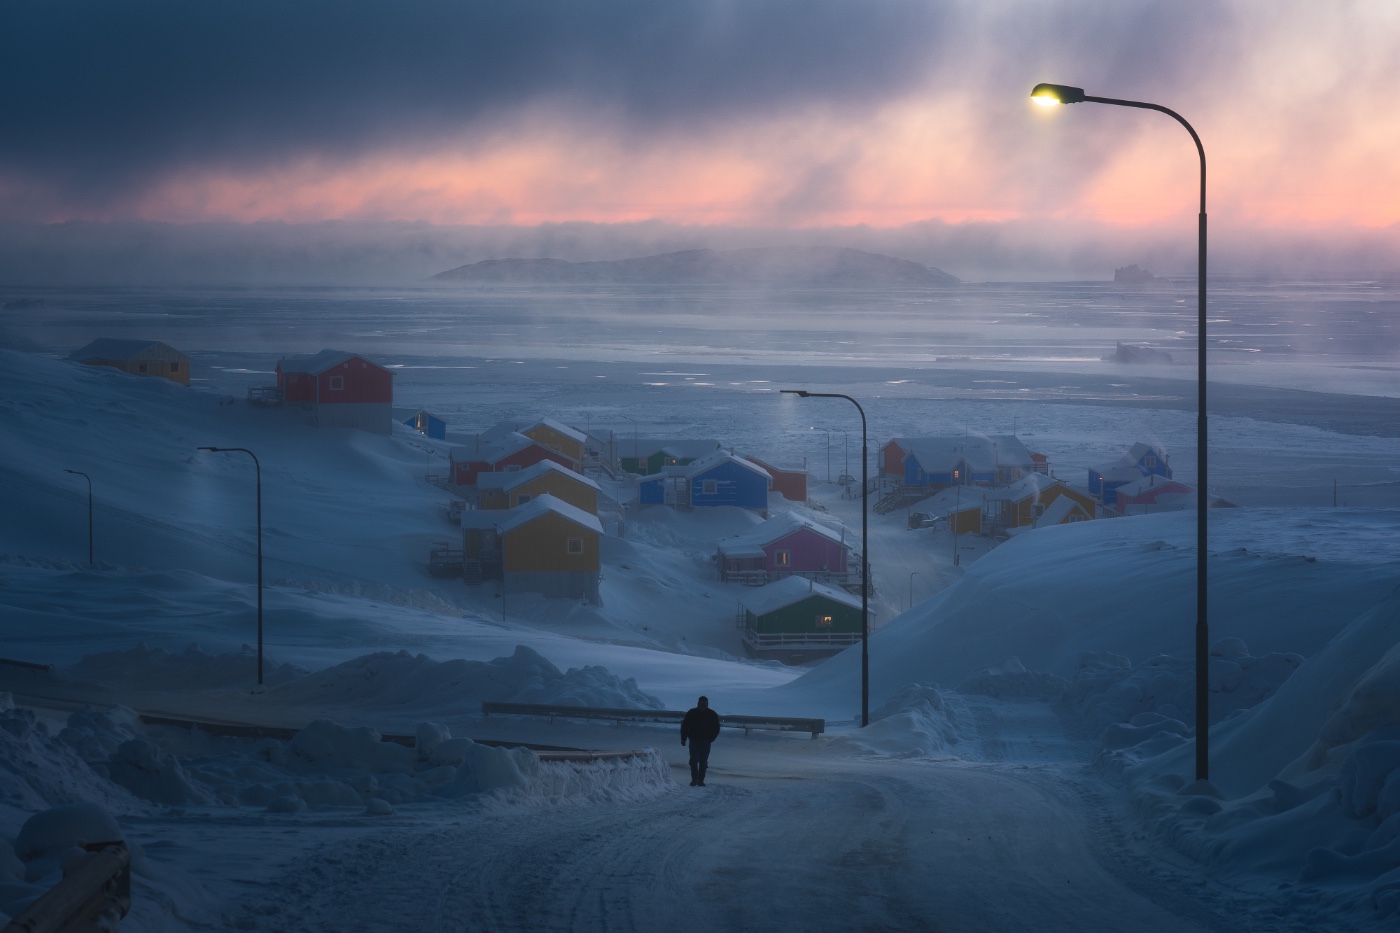 March-is-the-coldest-month-of-Upernavik-in-northwest-Greenland-with-an-average-temperature-of-minus-23-degrees-Celsius.jpg